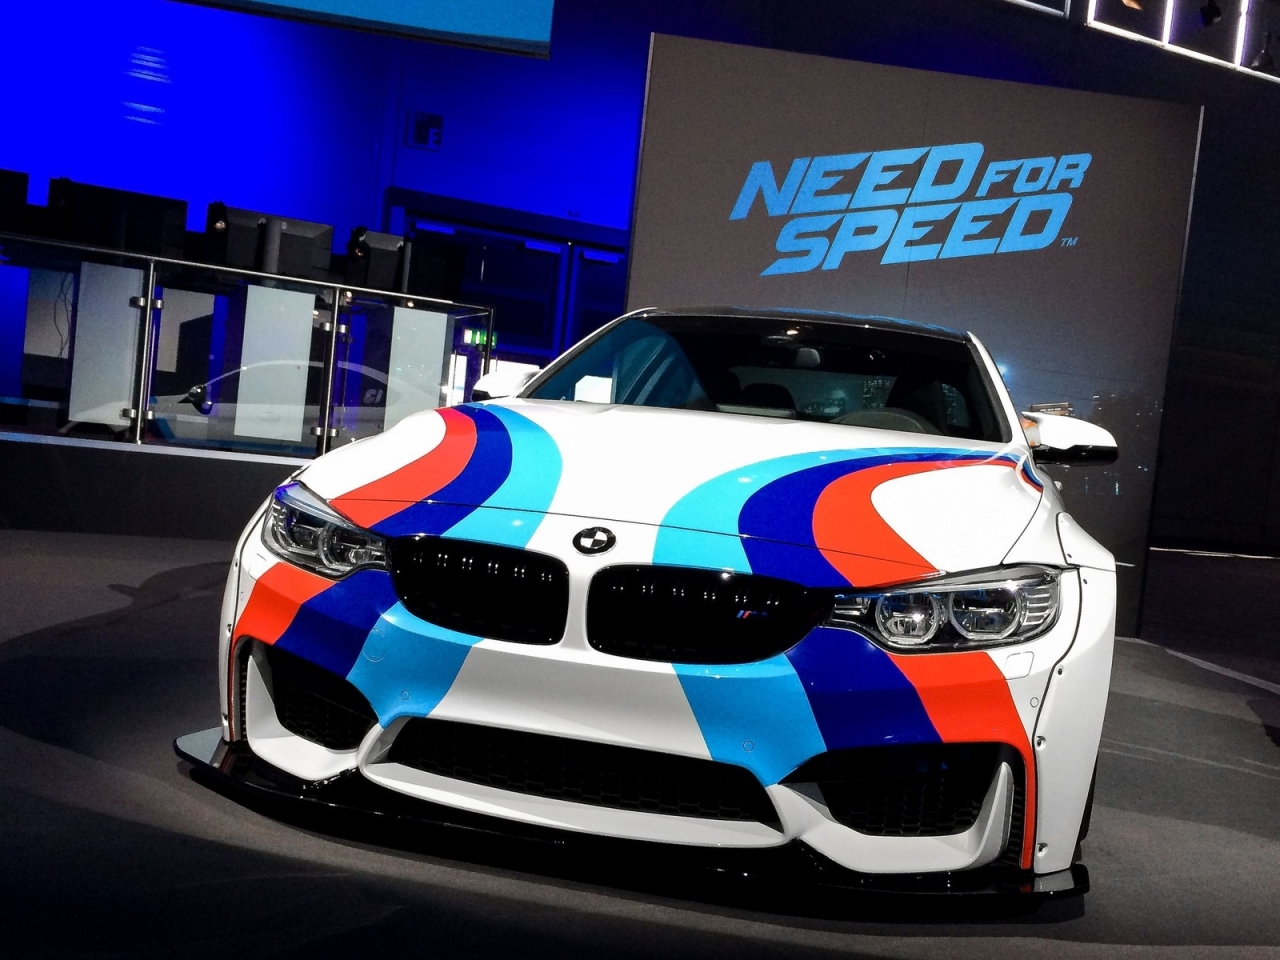 Need For Speed BMW for 1280 x 960 resolution